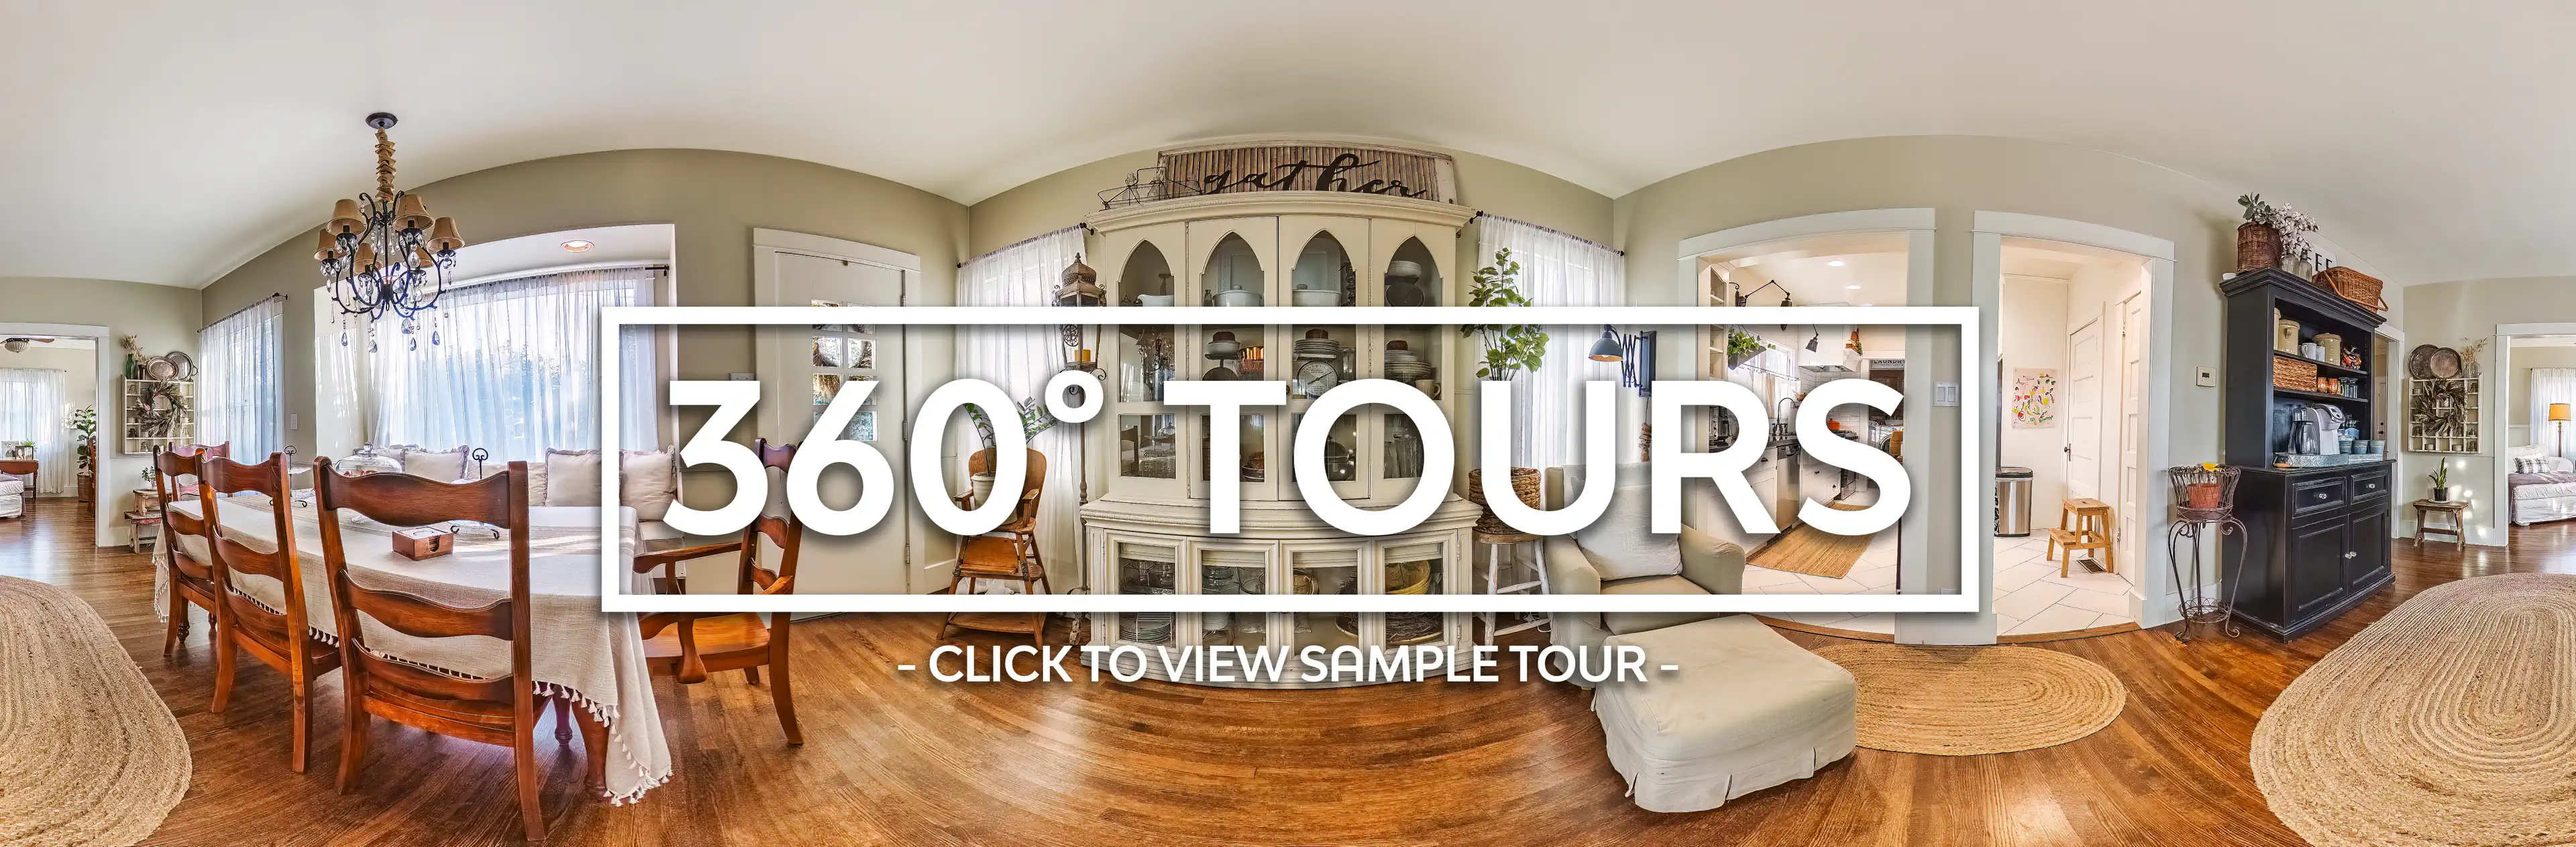 Immersive 360-degree virtual tour showcasing a luxurious dining room remodel in a San Dimas real estate listing